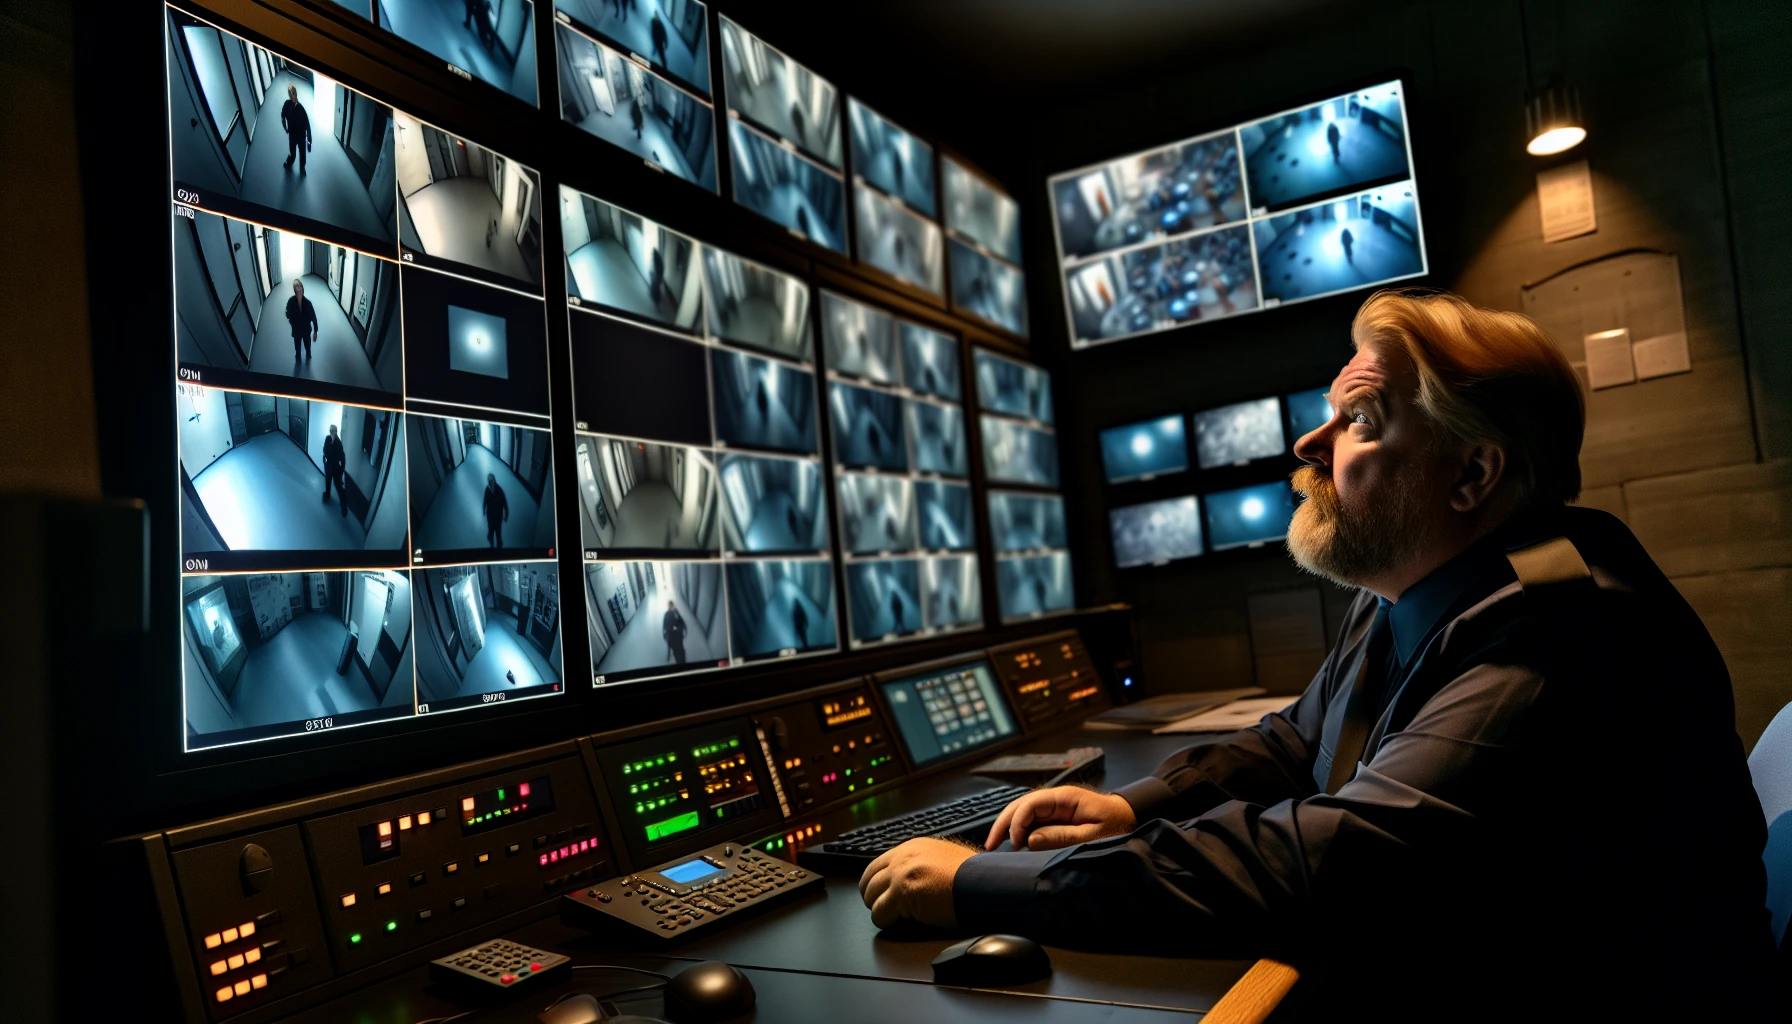 Security operator monitoring multiple screens in a control room